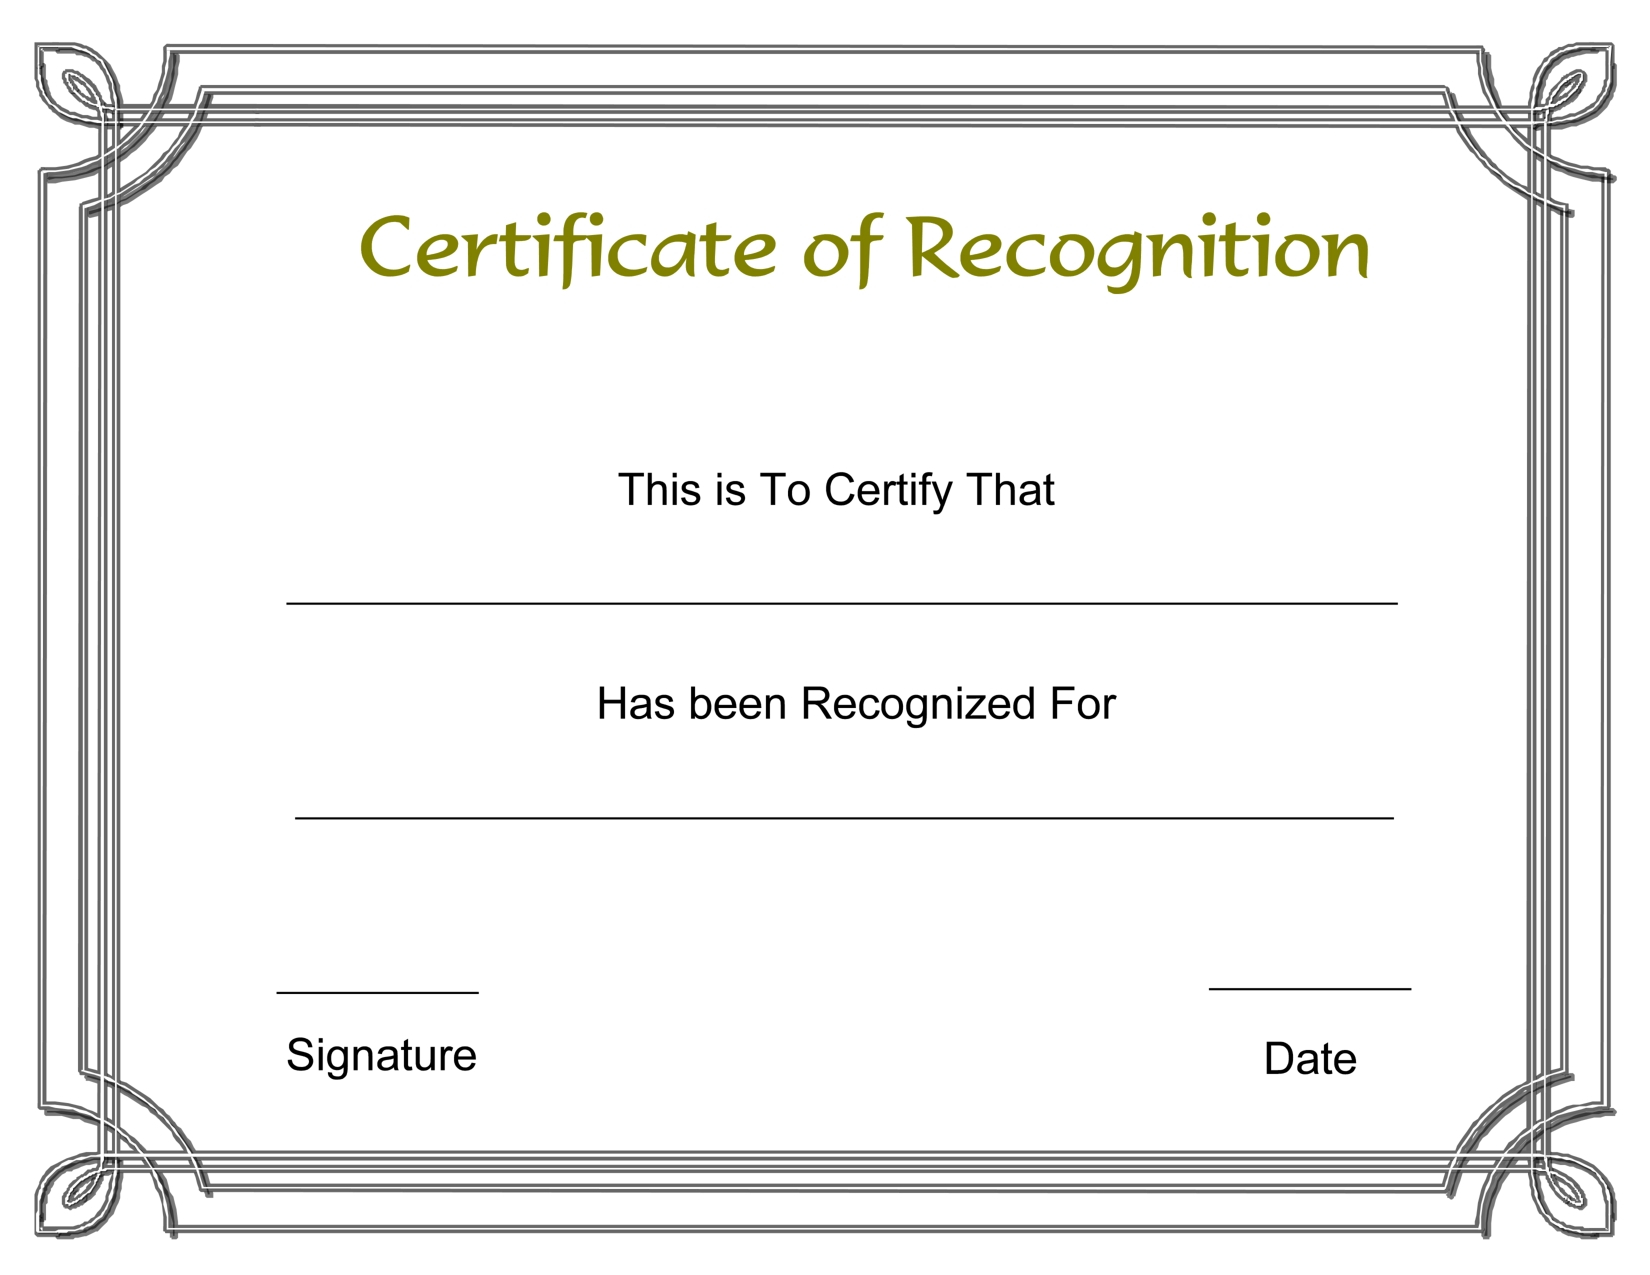 Certificate Template Recognition | Safebest.xyz Throughout Free Template For Certificate Of Recognition